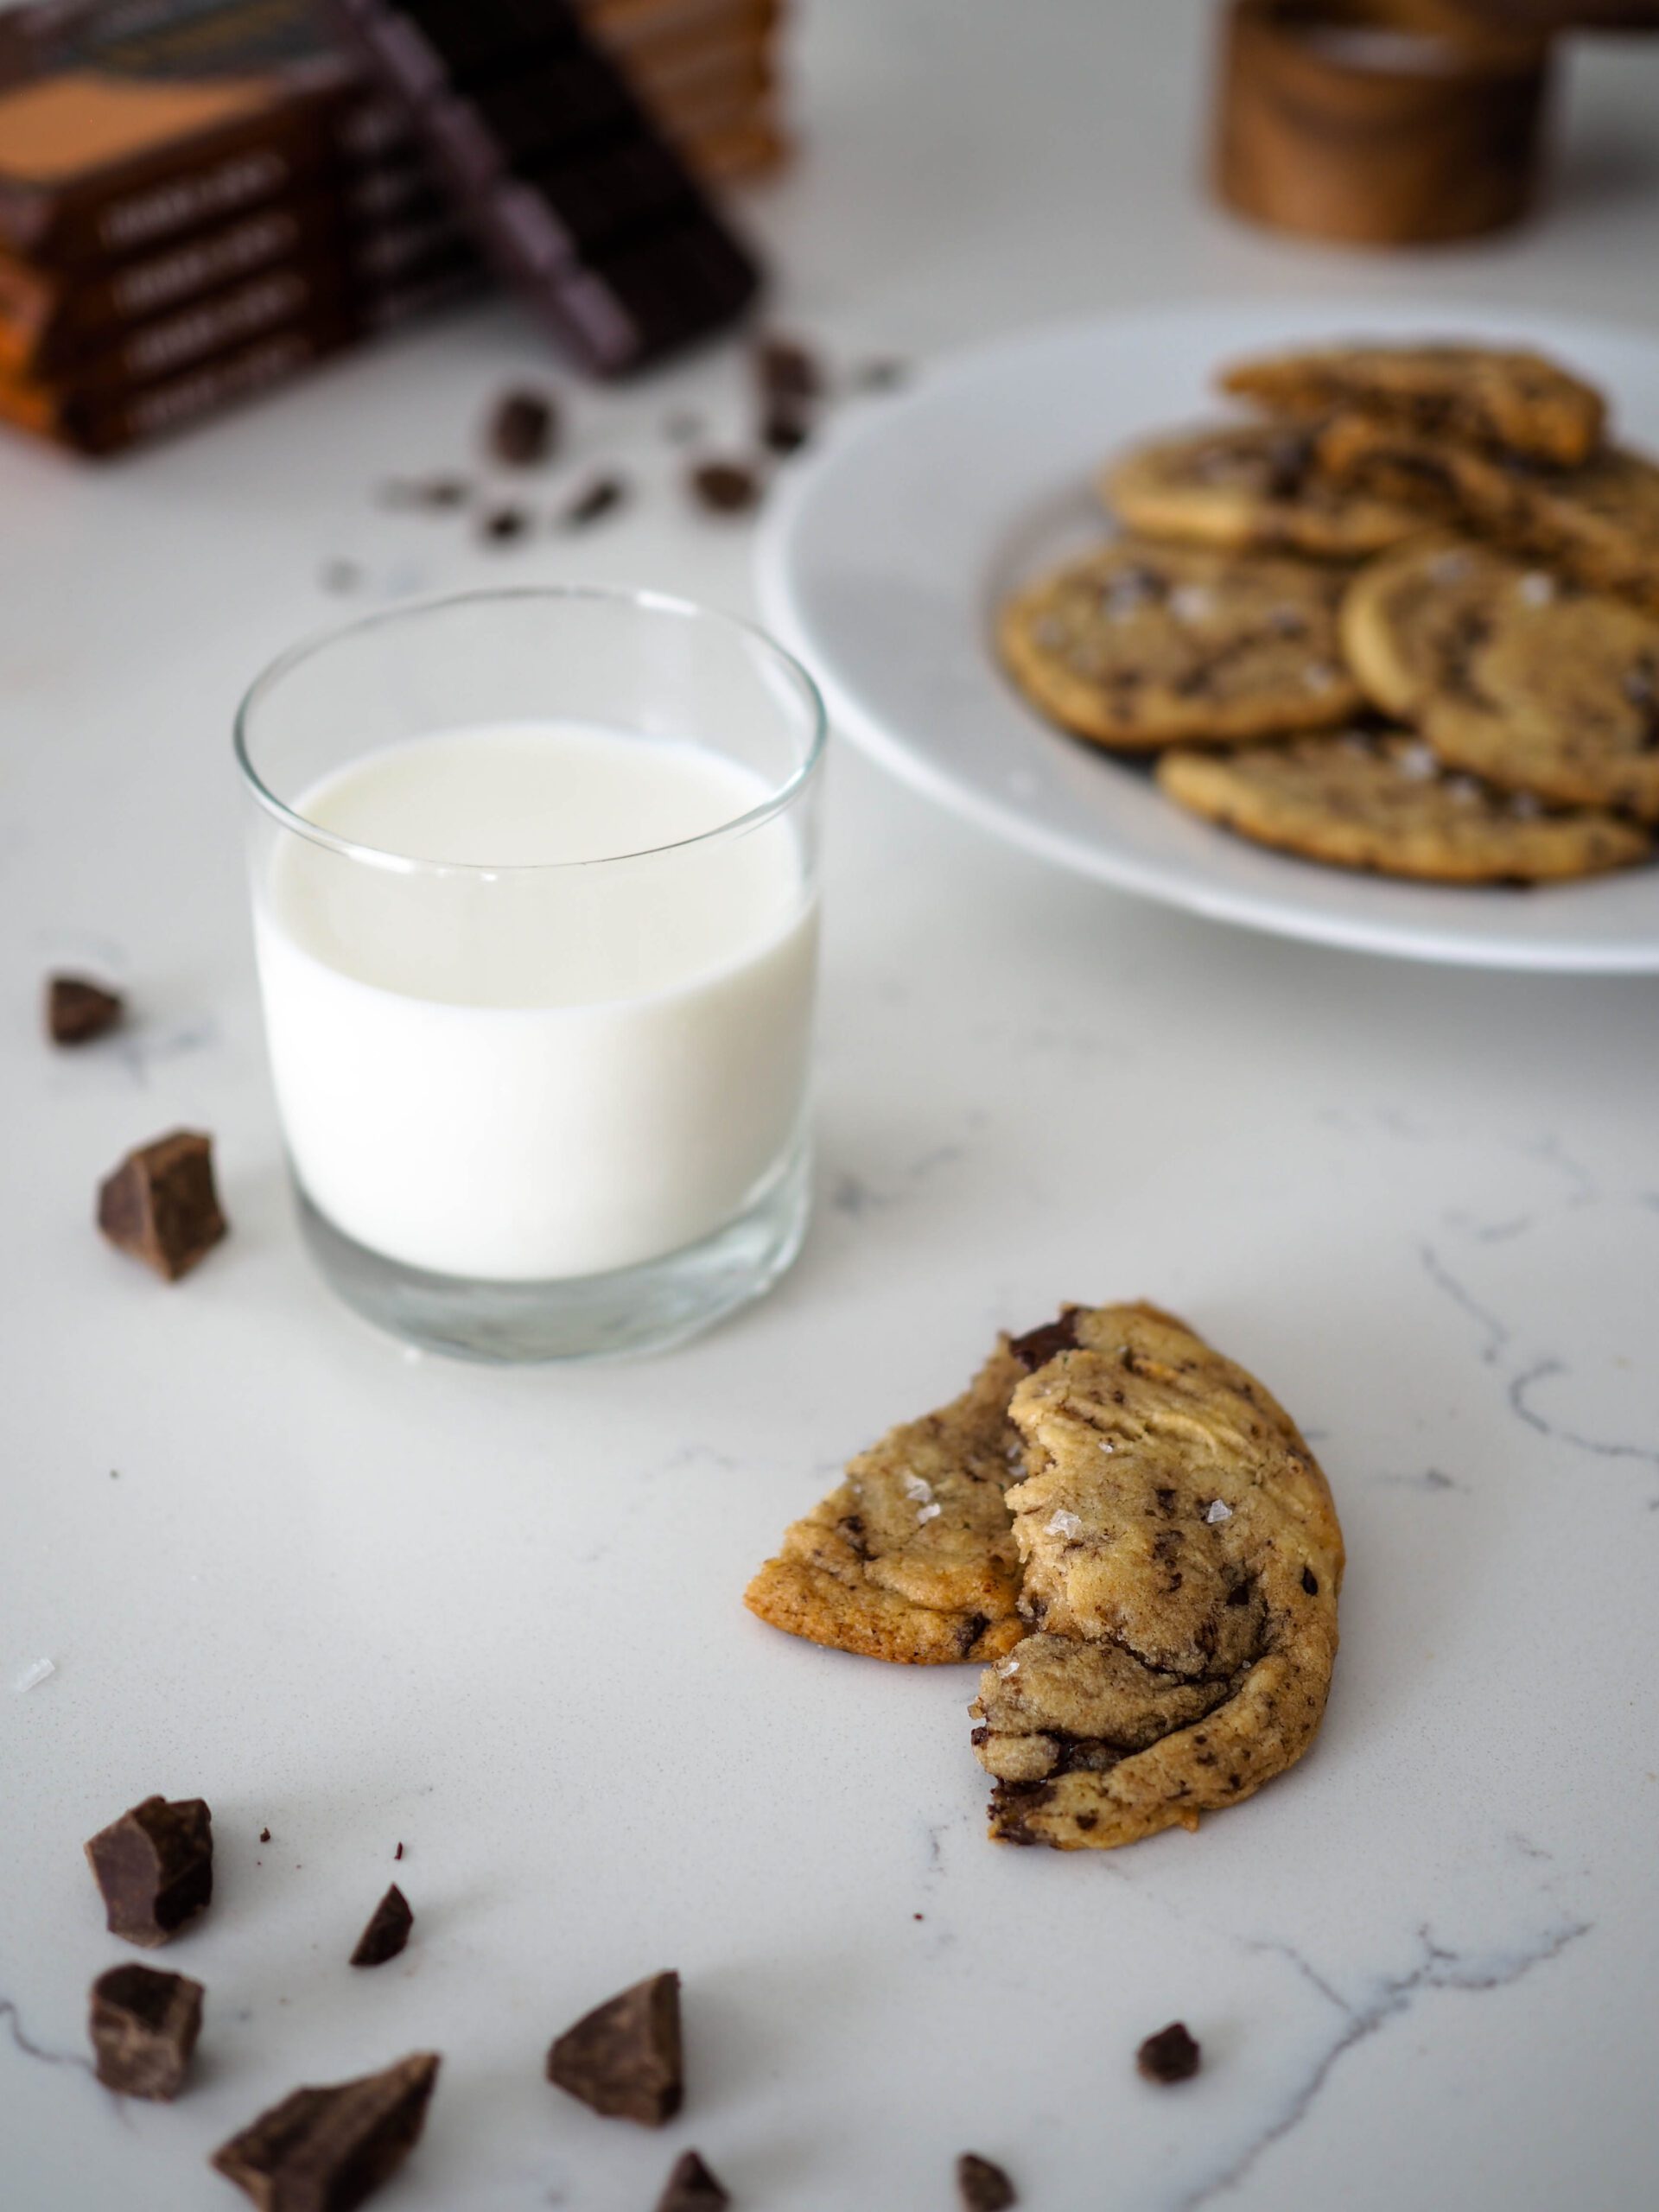 A glass of milk beside two halves of a chocolate chip cookie.